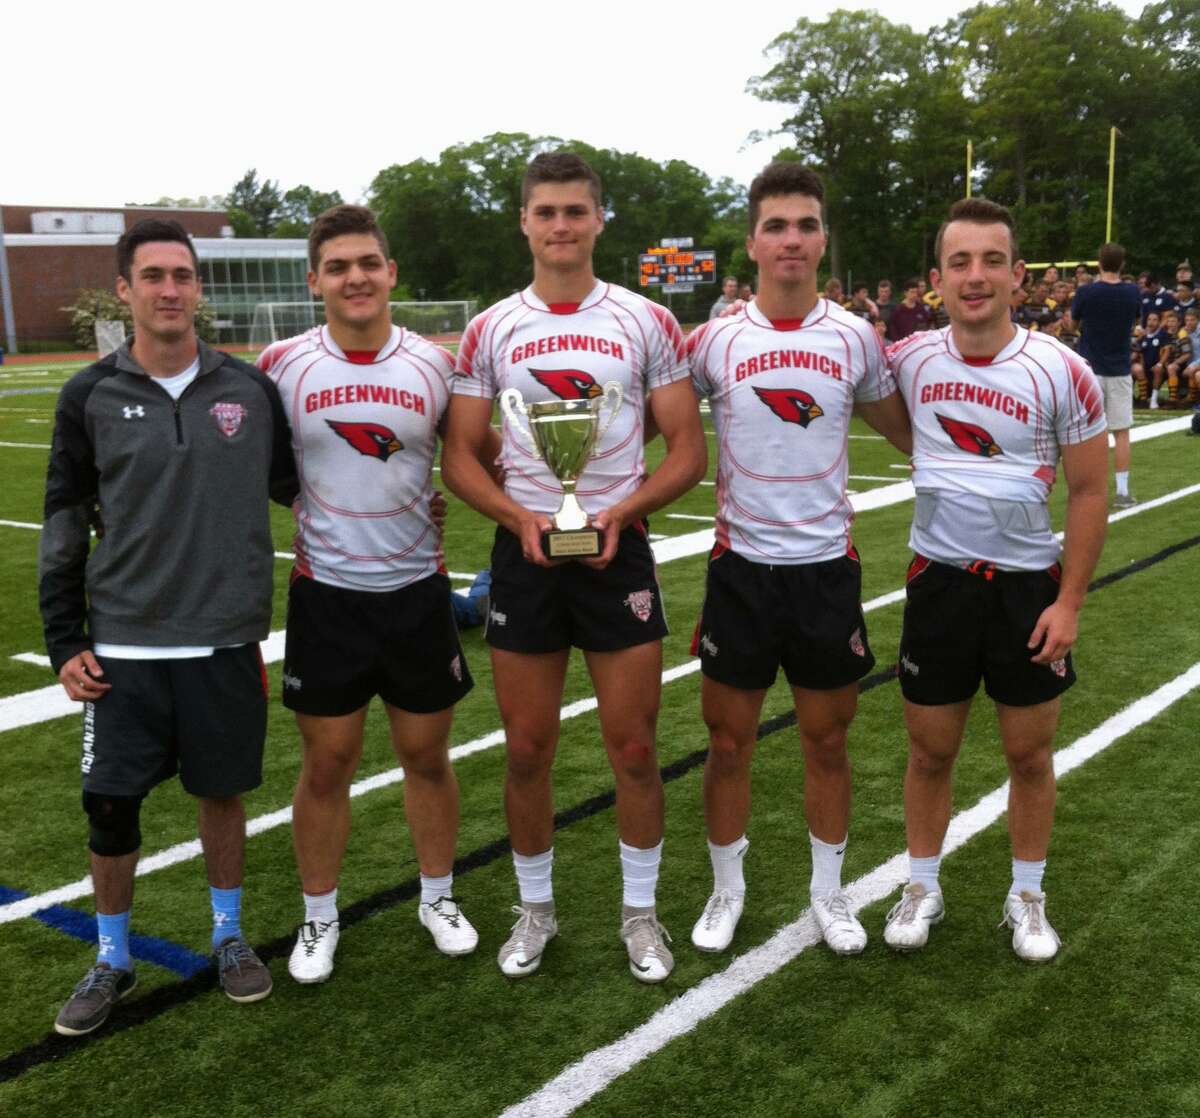 From left to right, Patrick McTiernan, Alex Nanai, Ian Pearson and Connor Weigold served as captains of the Greenwich High School rugby team, which captured the state championship with a 52-40 win over Simsbury Saturday, May 27, 2017 at Fairfield Ludlowe High School.